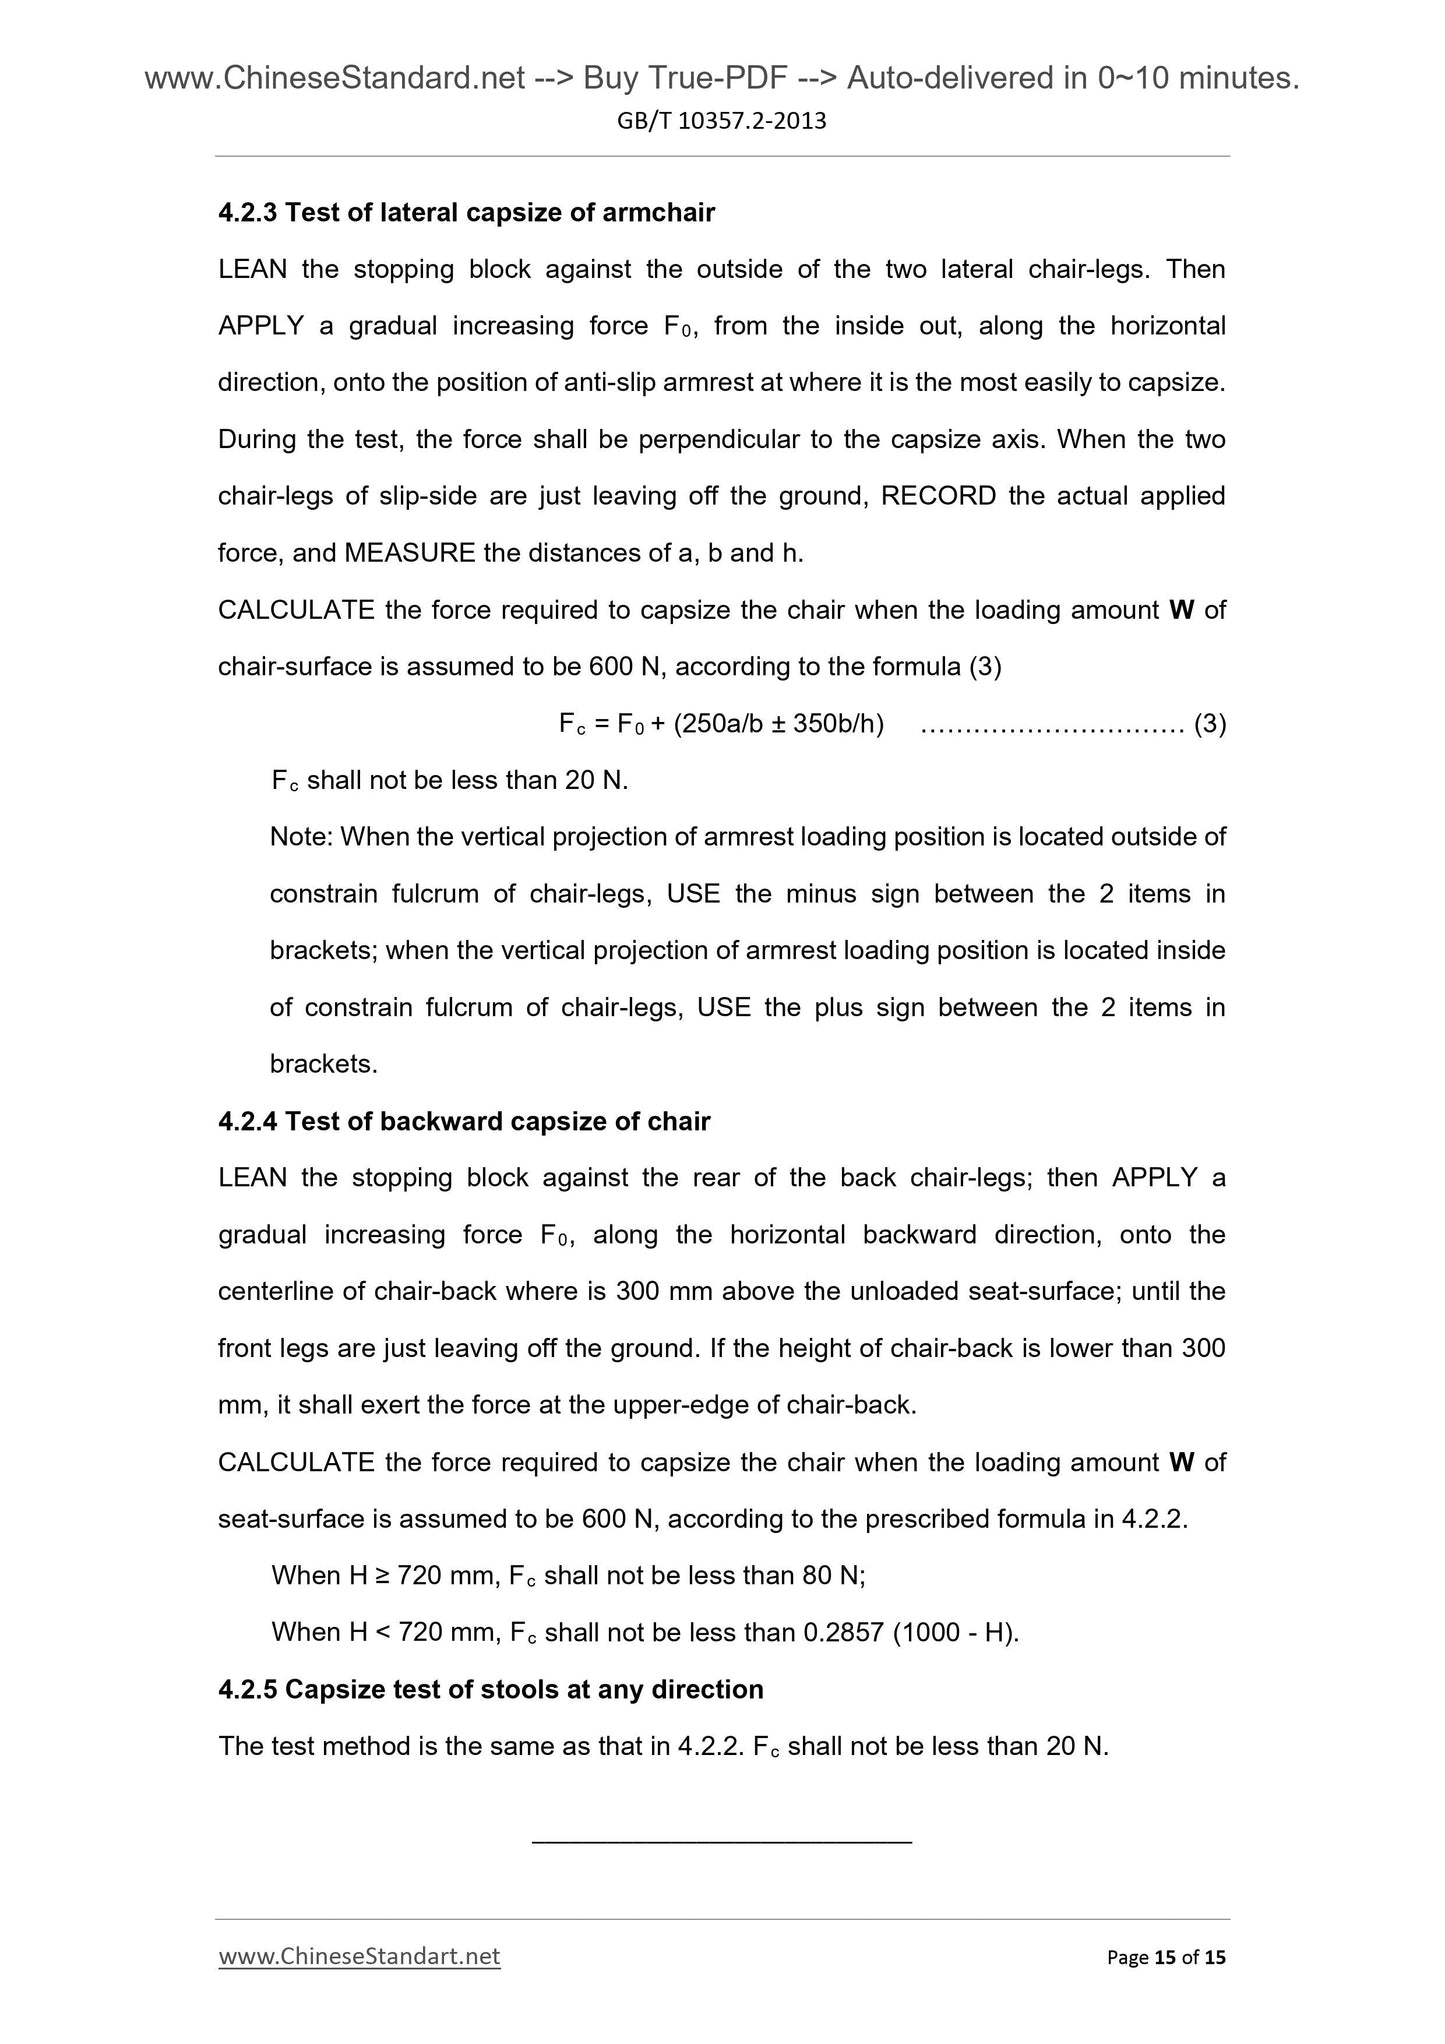 GB/T 10357.2-2013 Page 8